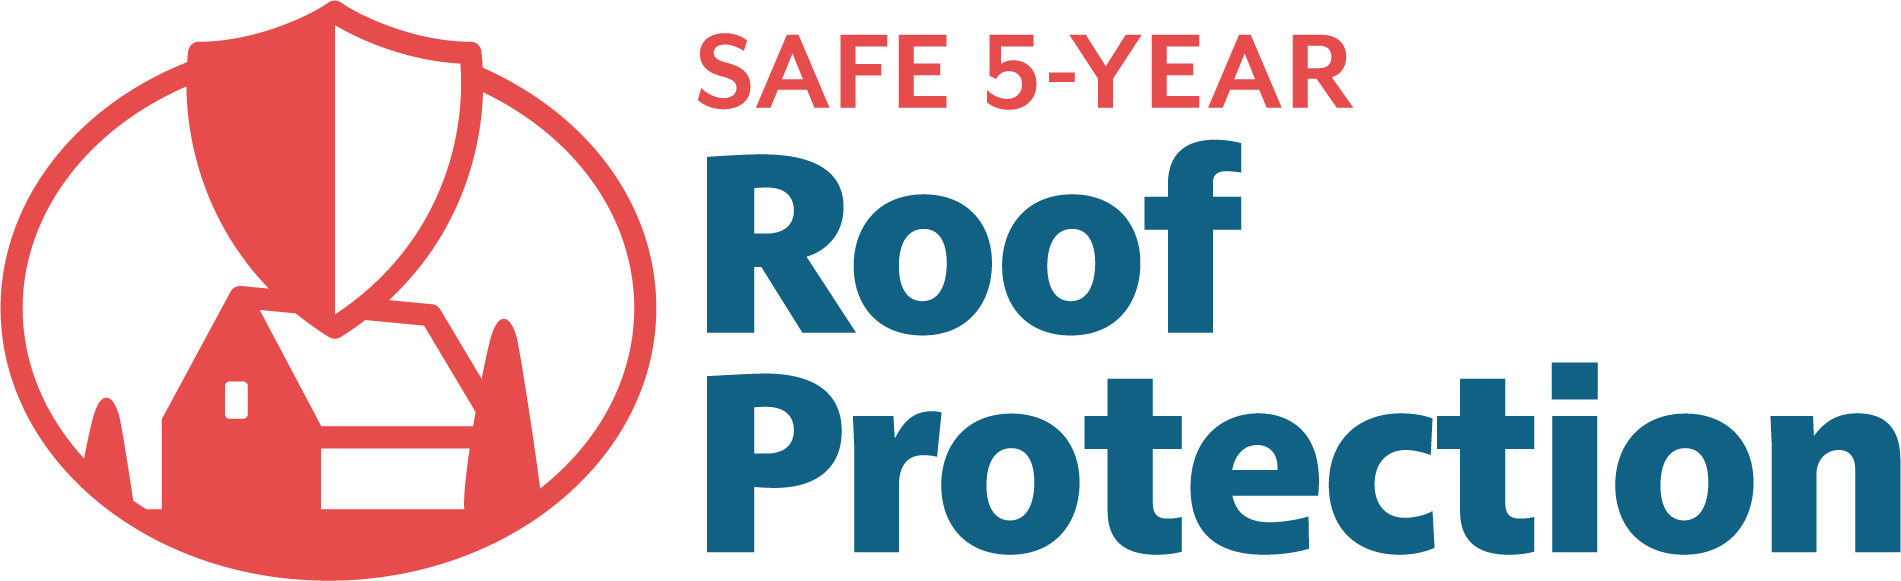 Five Year Roof Protection